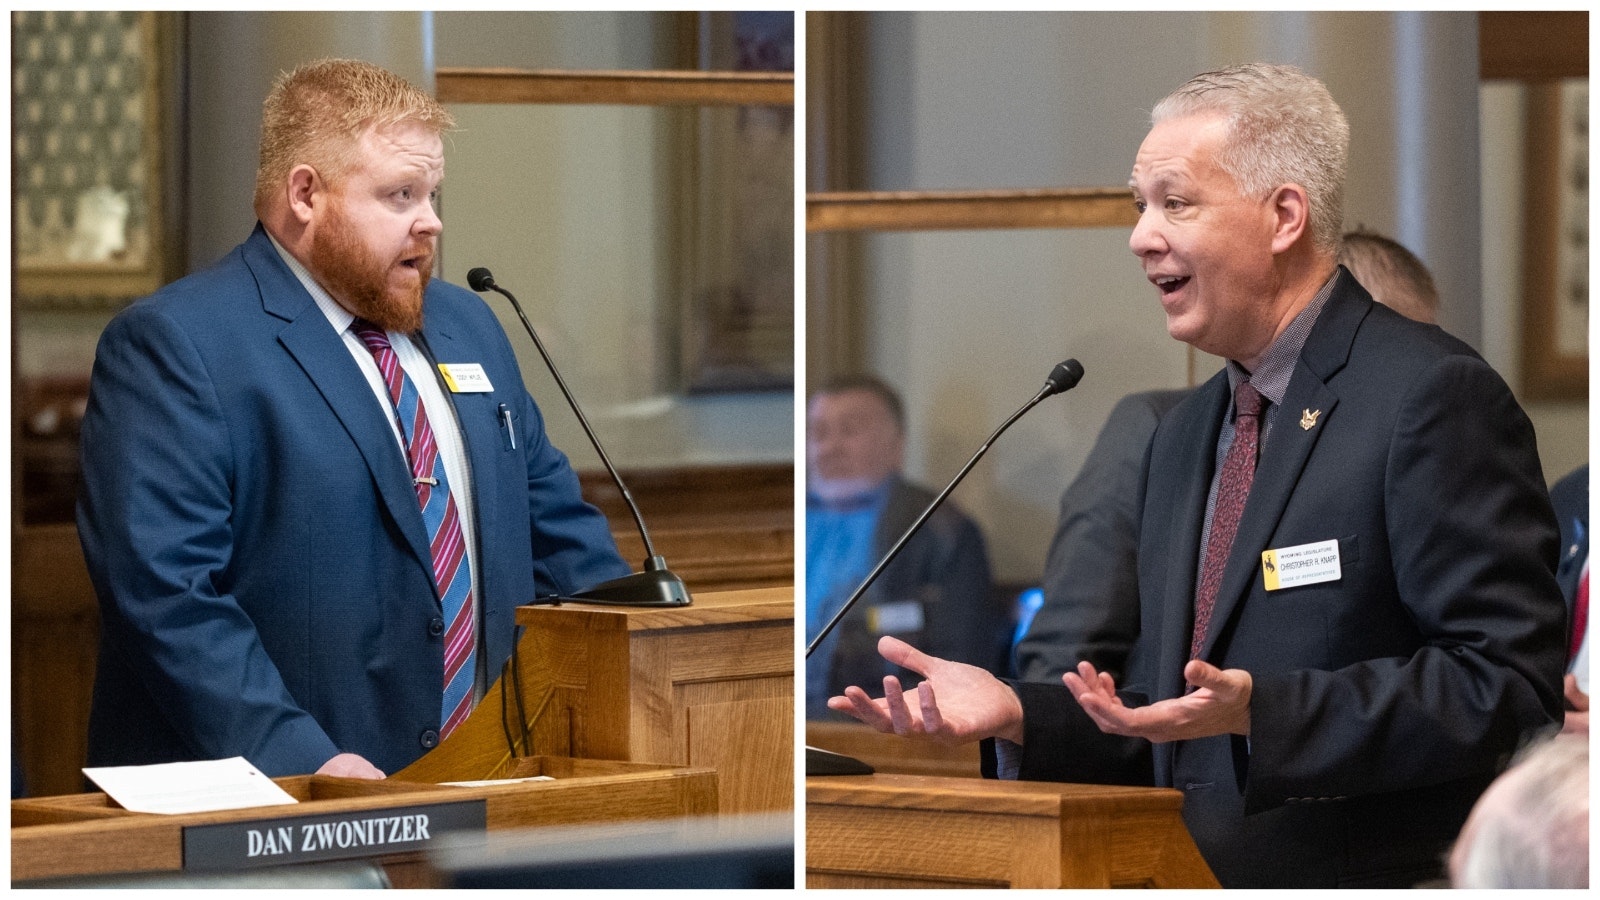 State Reps. Cody Wylie, R-Rock Springs, and Christopher Knapp, R-Gillette